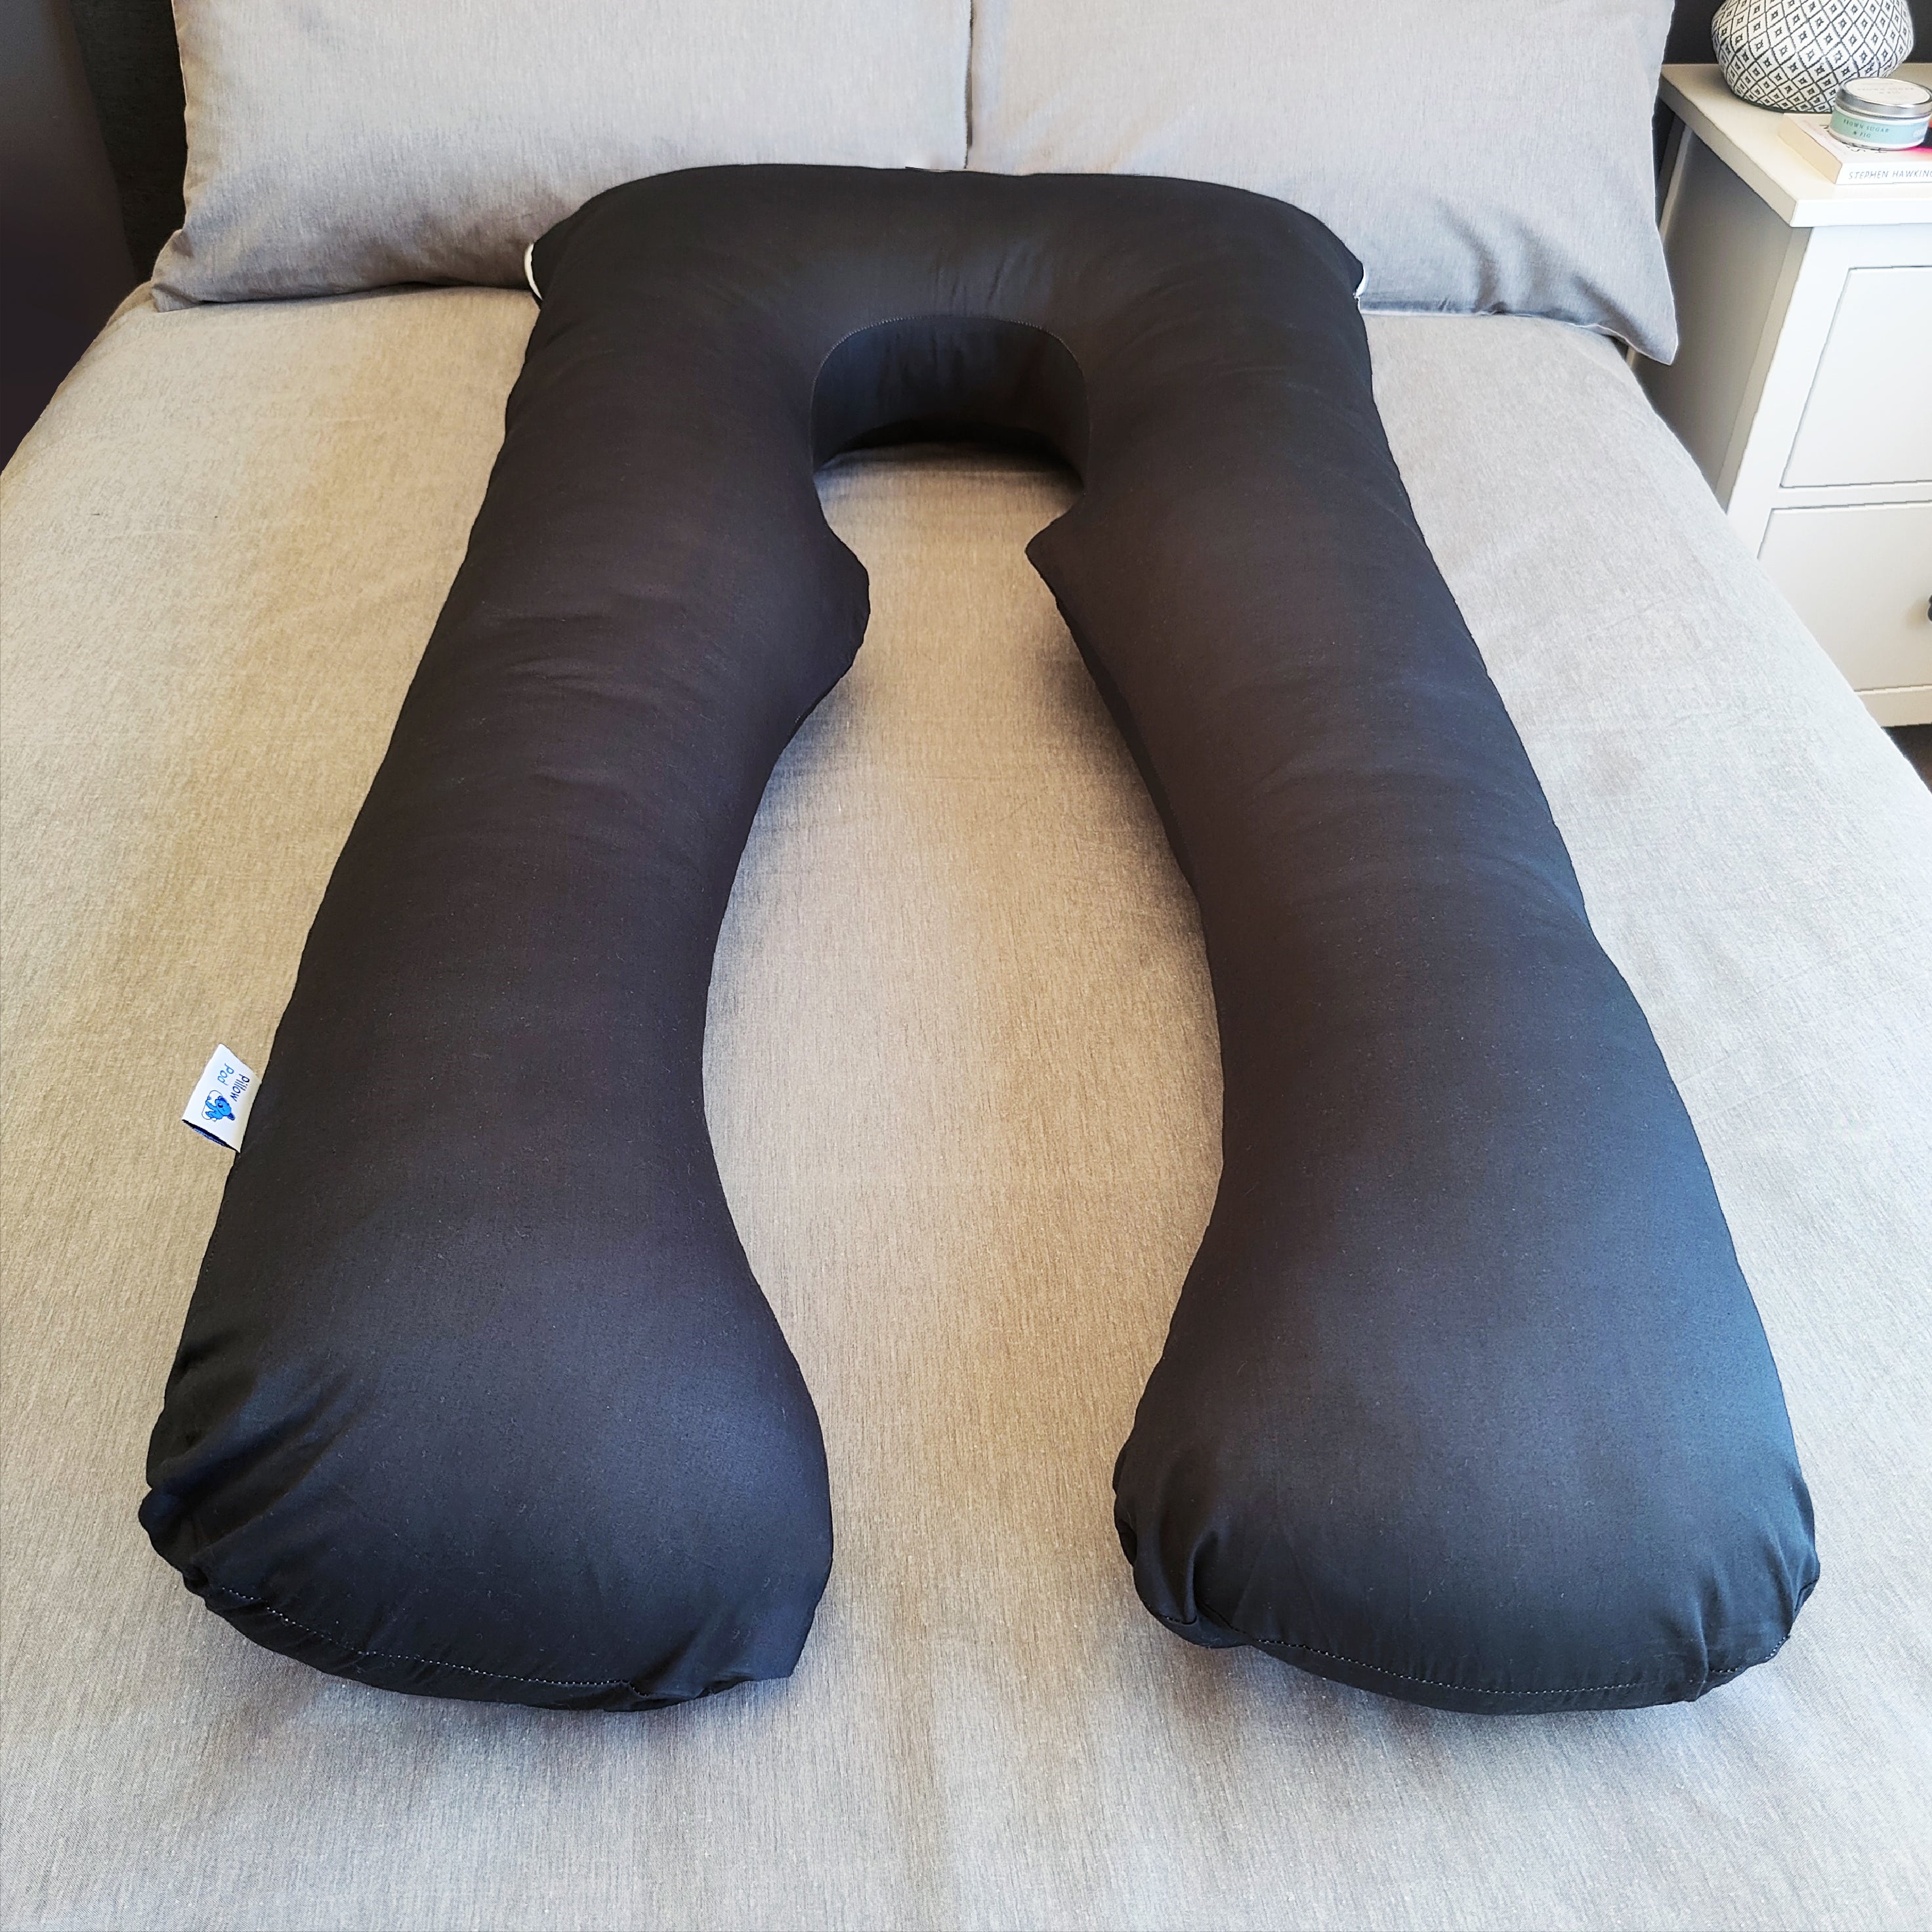 Black Pillow Pod Full Body Support Pillow on Bed, with Plain Grey Bed Spread